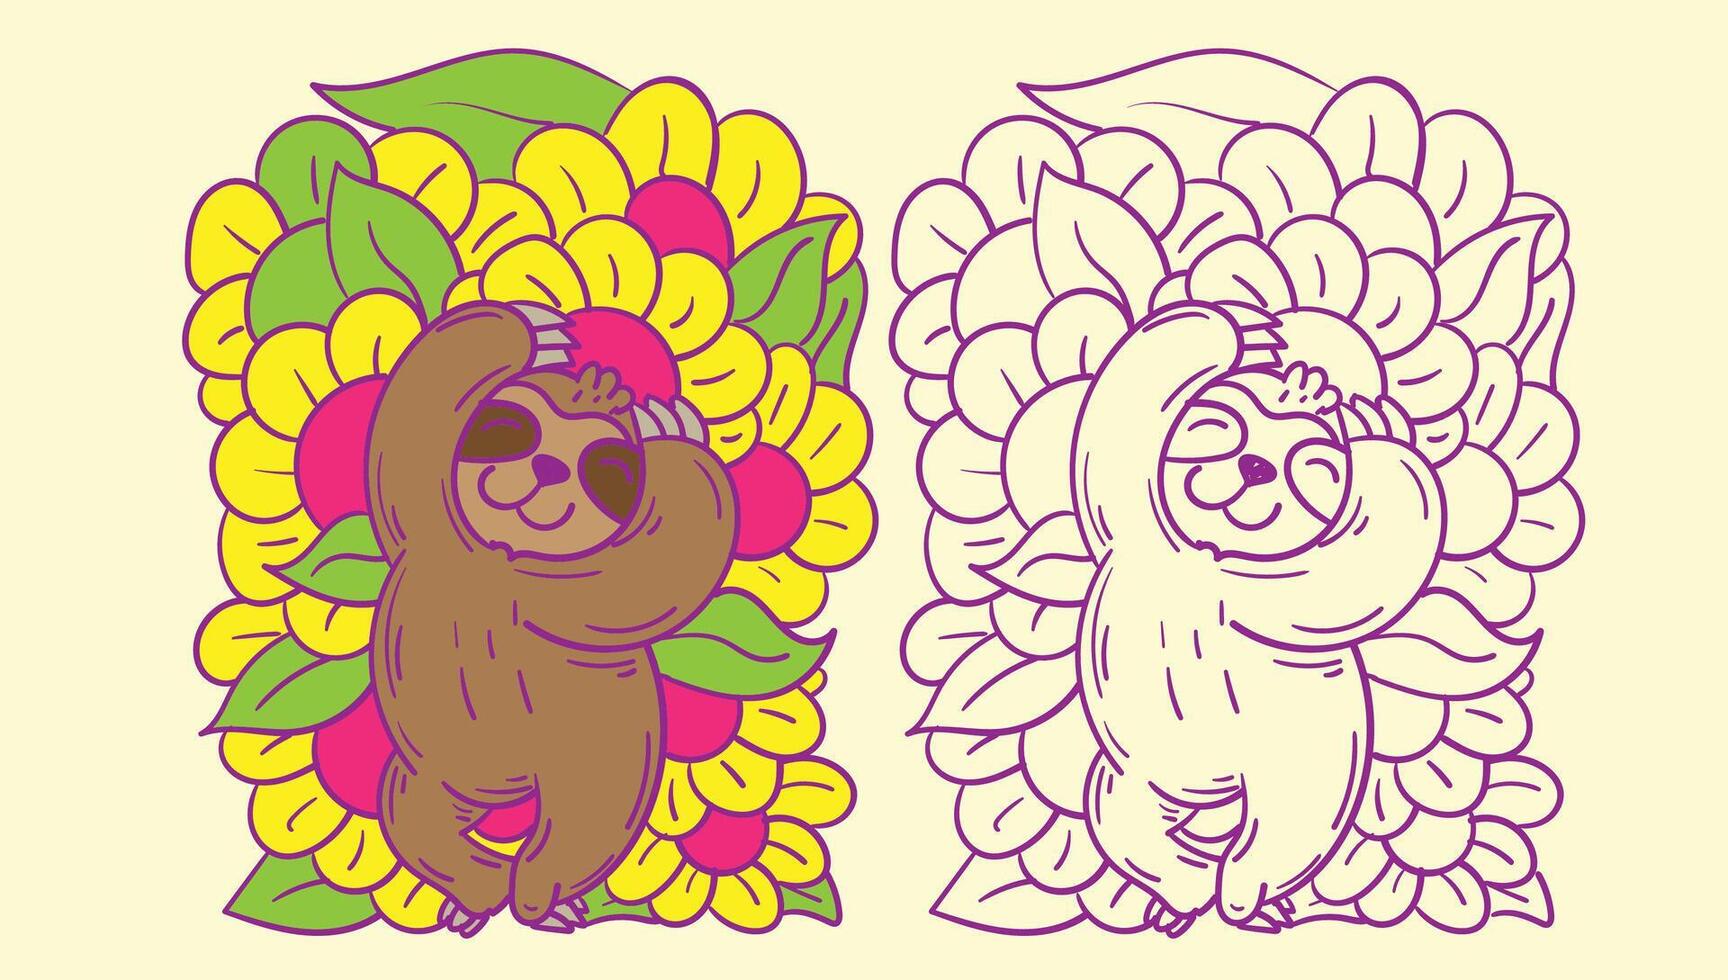 sloth doodle cute animal illustration for book coloring page vector